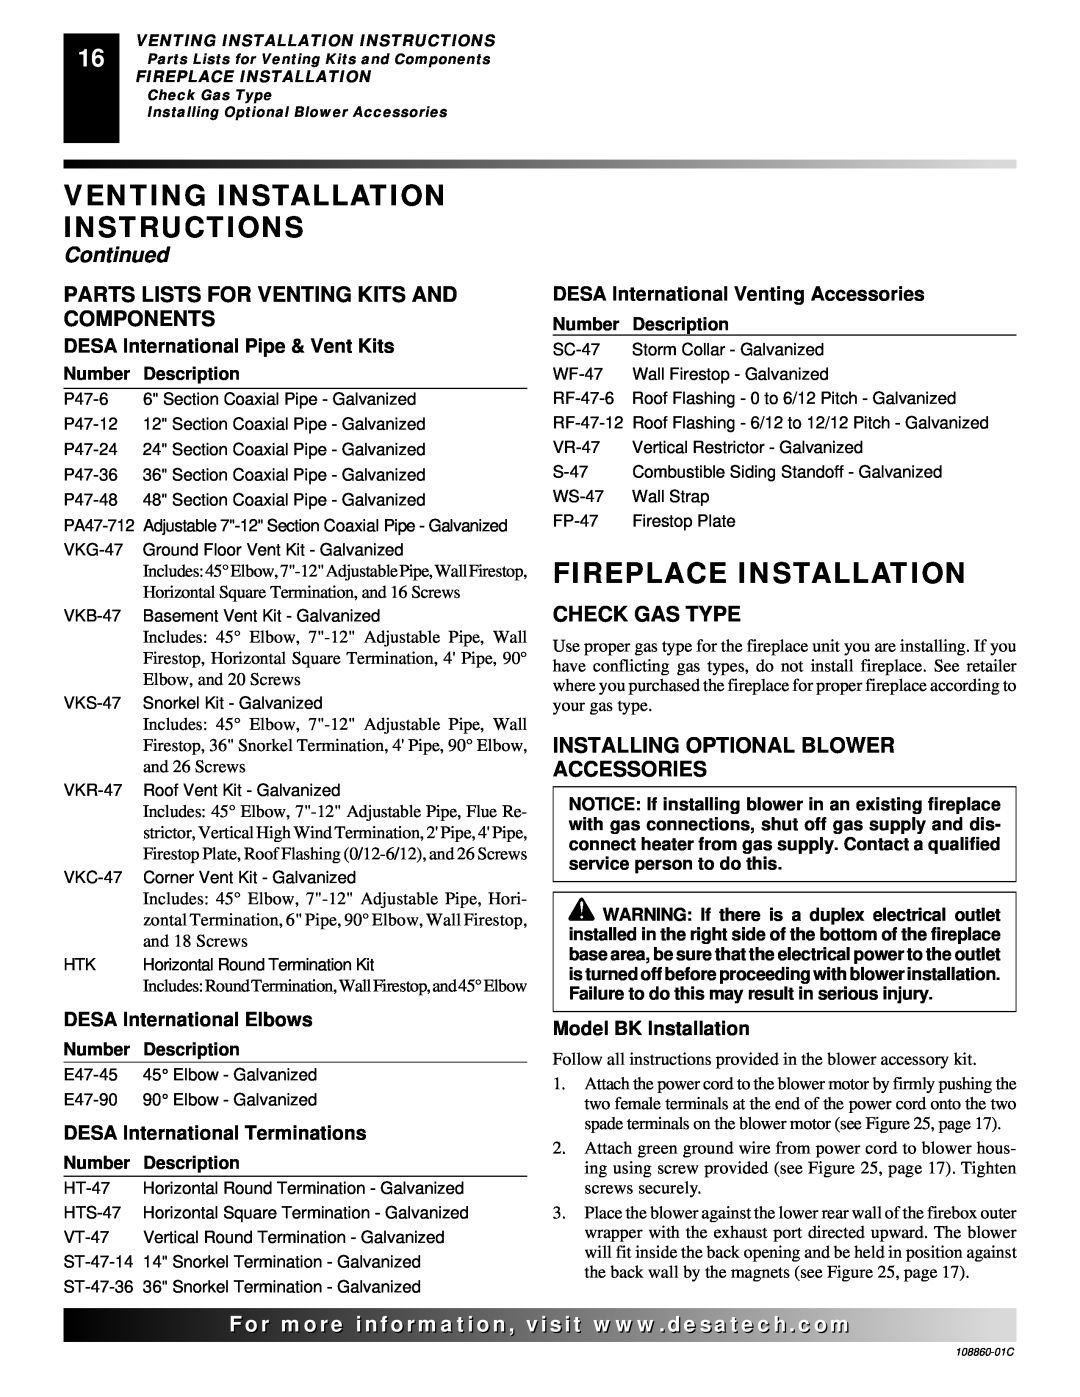 Desa (V)T36EP Fireplace Installation, Venting Installation Instructions, Continued, DESA International Pipe & Vent Kits 